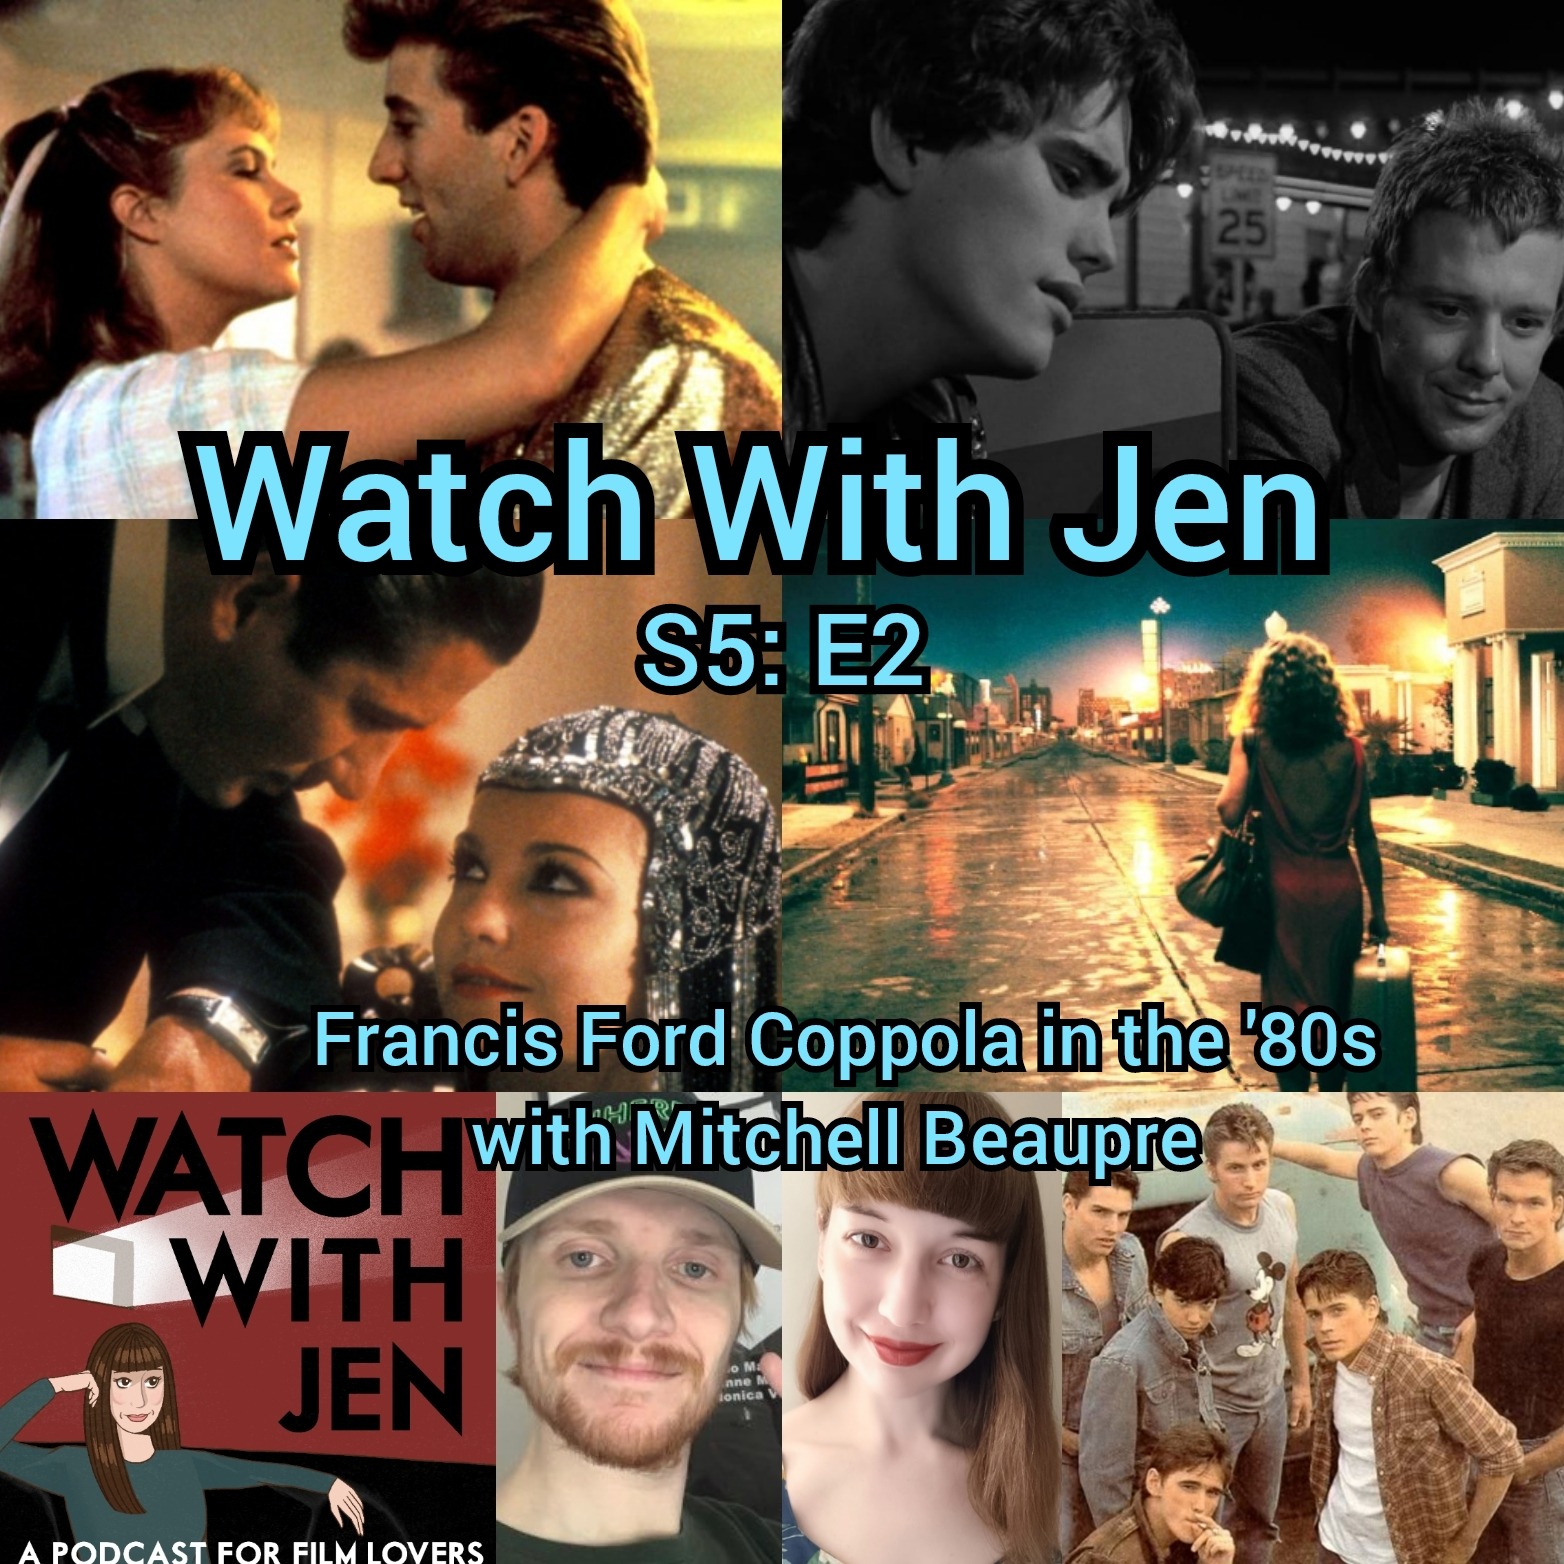 Watch With Jen - S5: E2 - Francis Ford Coppola in the '80s with Mitchell Beaupre